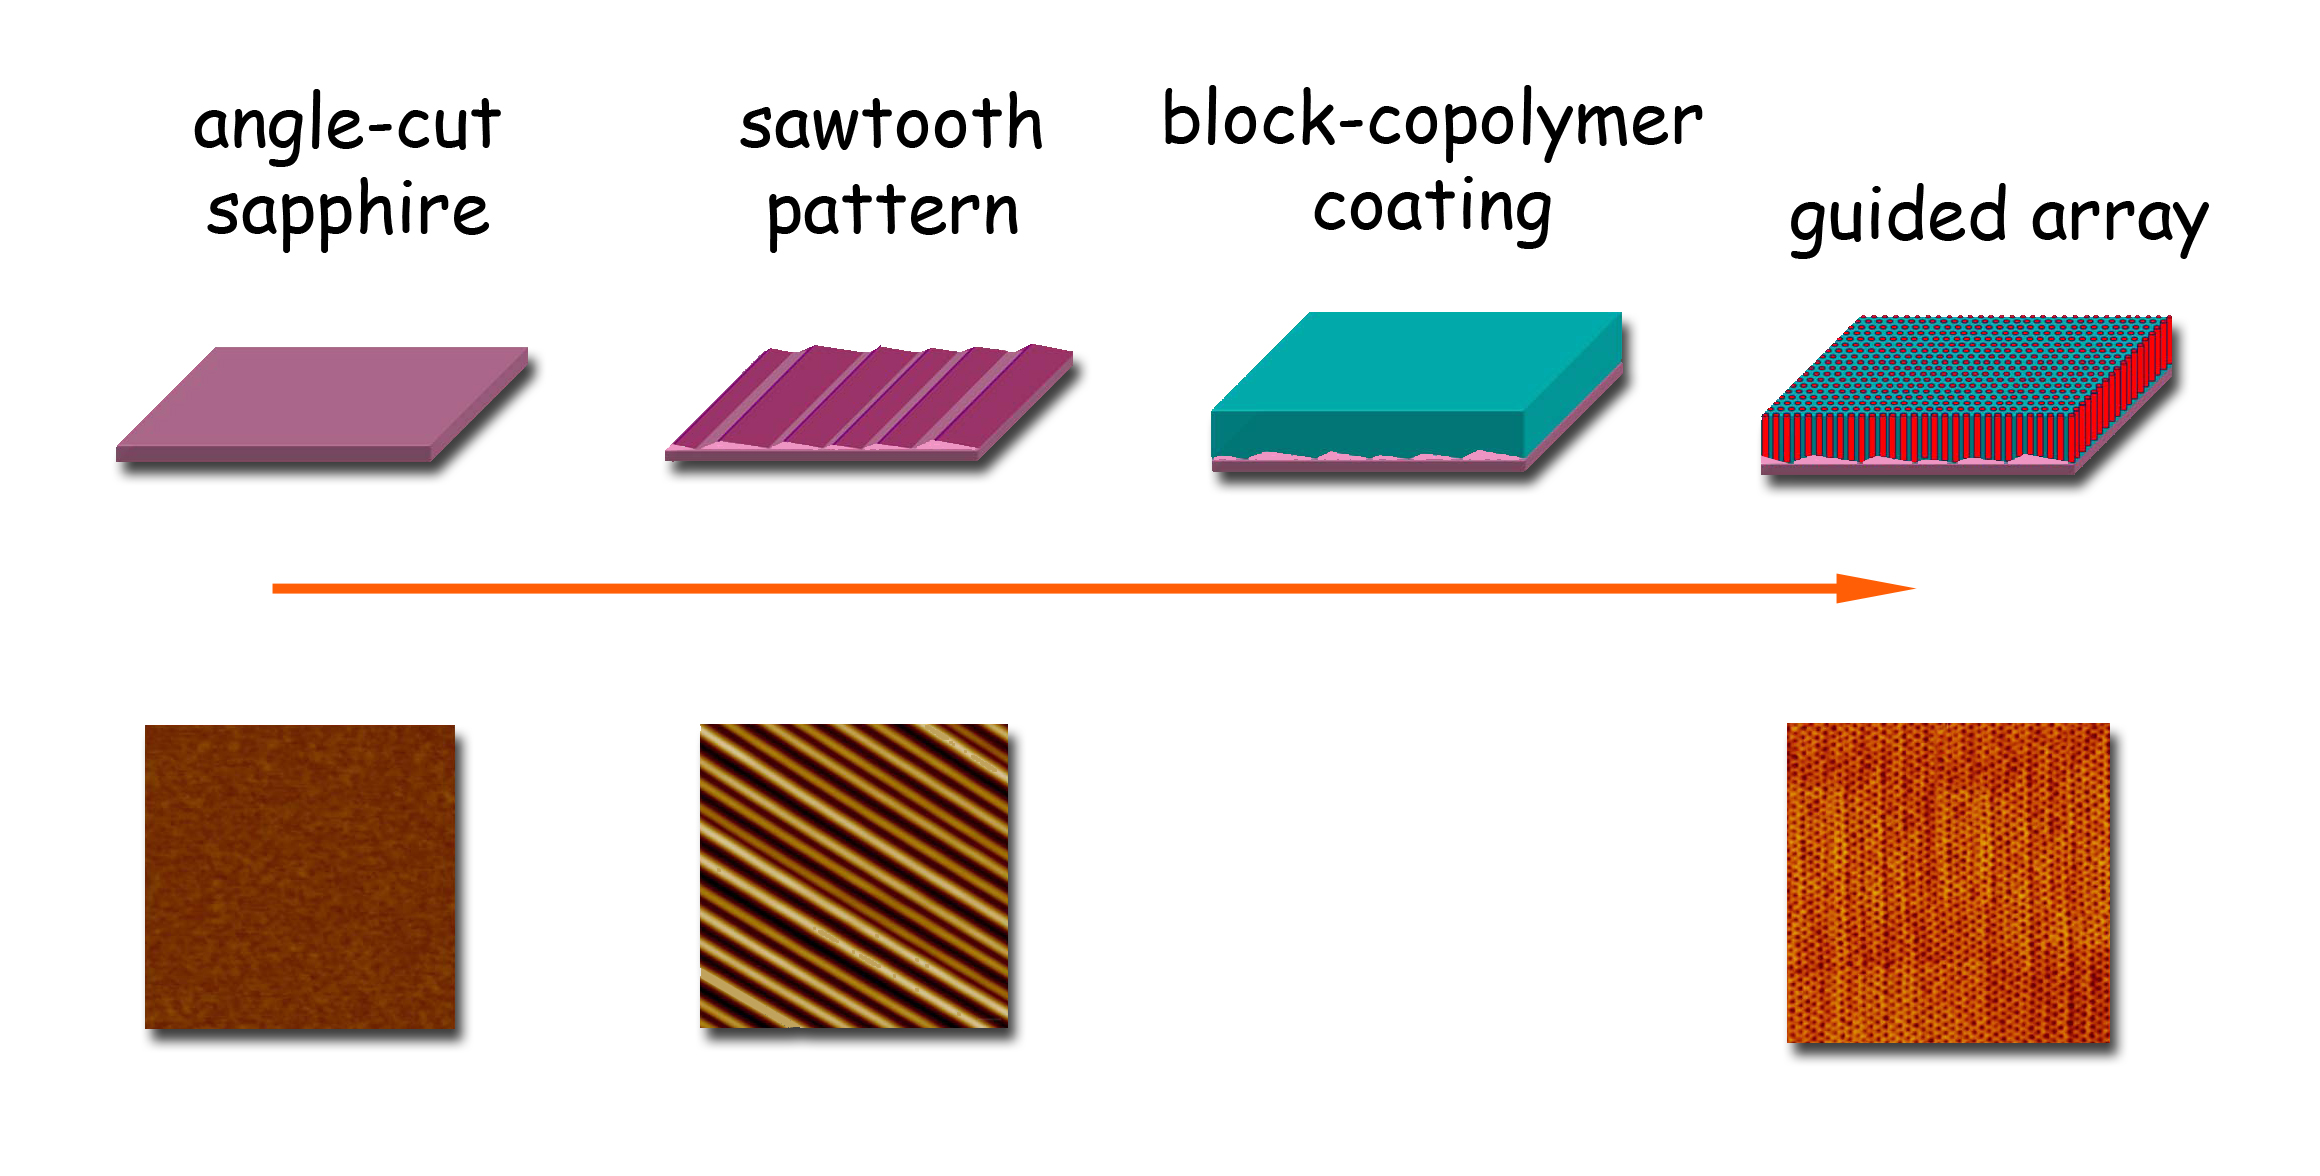 To generate long-range arrays of densely packed cyclindrical domains, the researchers began with single crystals of sapphire cut at an angle to the crystalline planes. The cut crystal was heated to over 1300° C and annealed in air for 24 hours to form saw-tooth patterns of parallel facets. A thin film of block copolymers was applied to the surface; chemical annealing produced an array of highly ordered, densely packed cylindrical domains extending across several square centimeters of the crystal. At bottom, atomic-force microscope images of the surface and copolymer array show the different stages. (Click on image for best resolution.)  